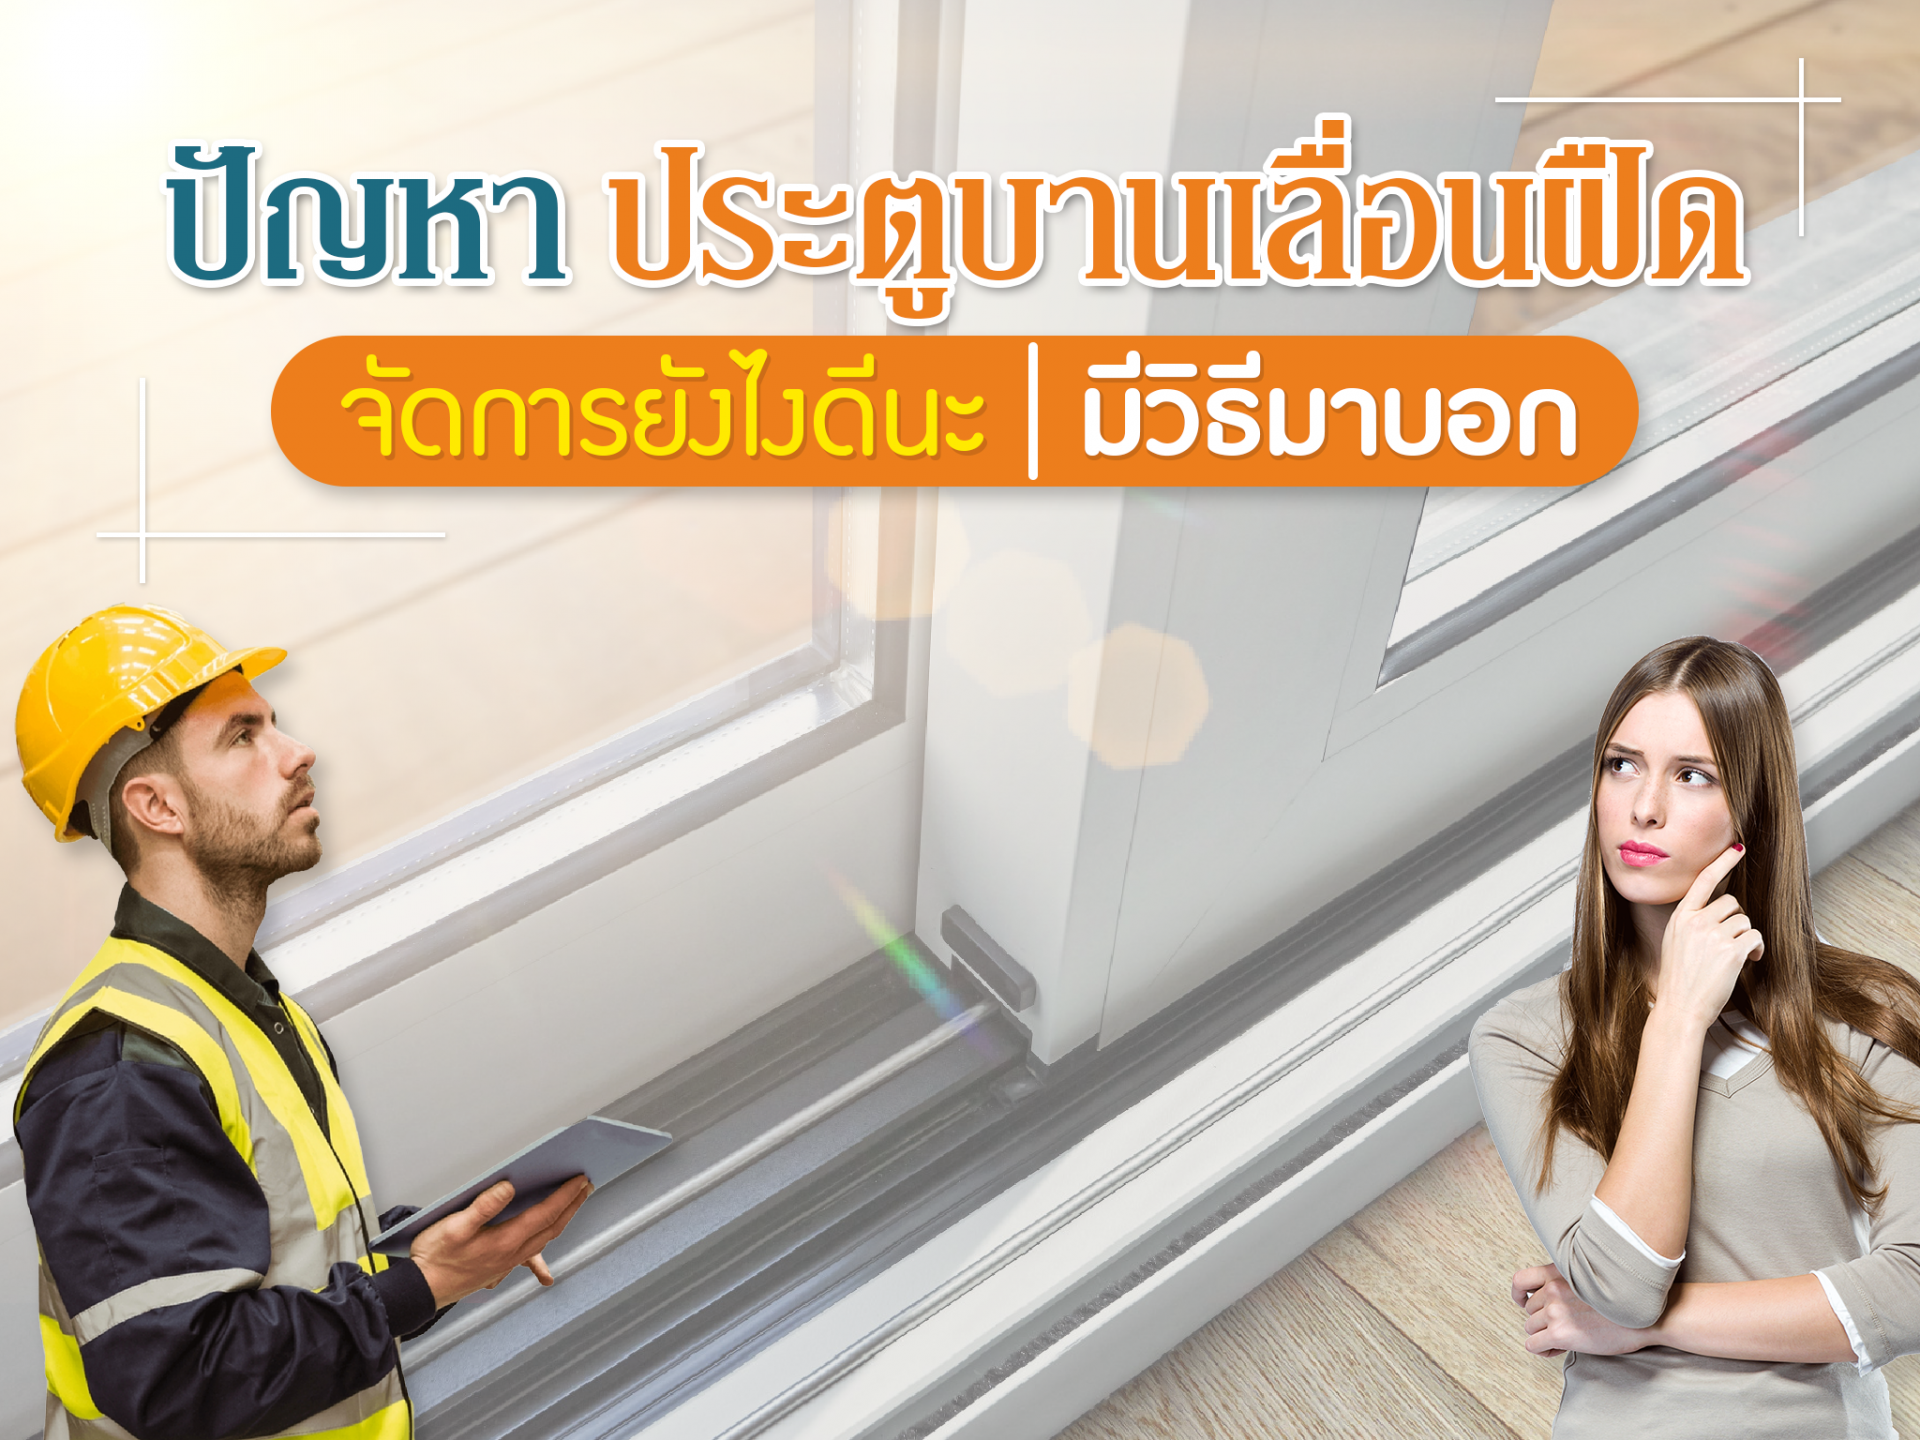  sliding door problem How do you manage it, tell me how.